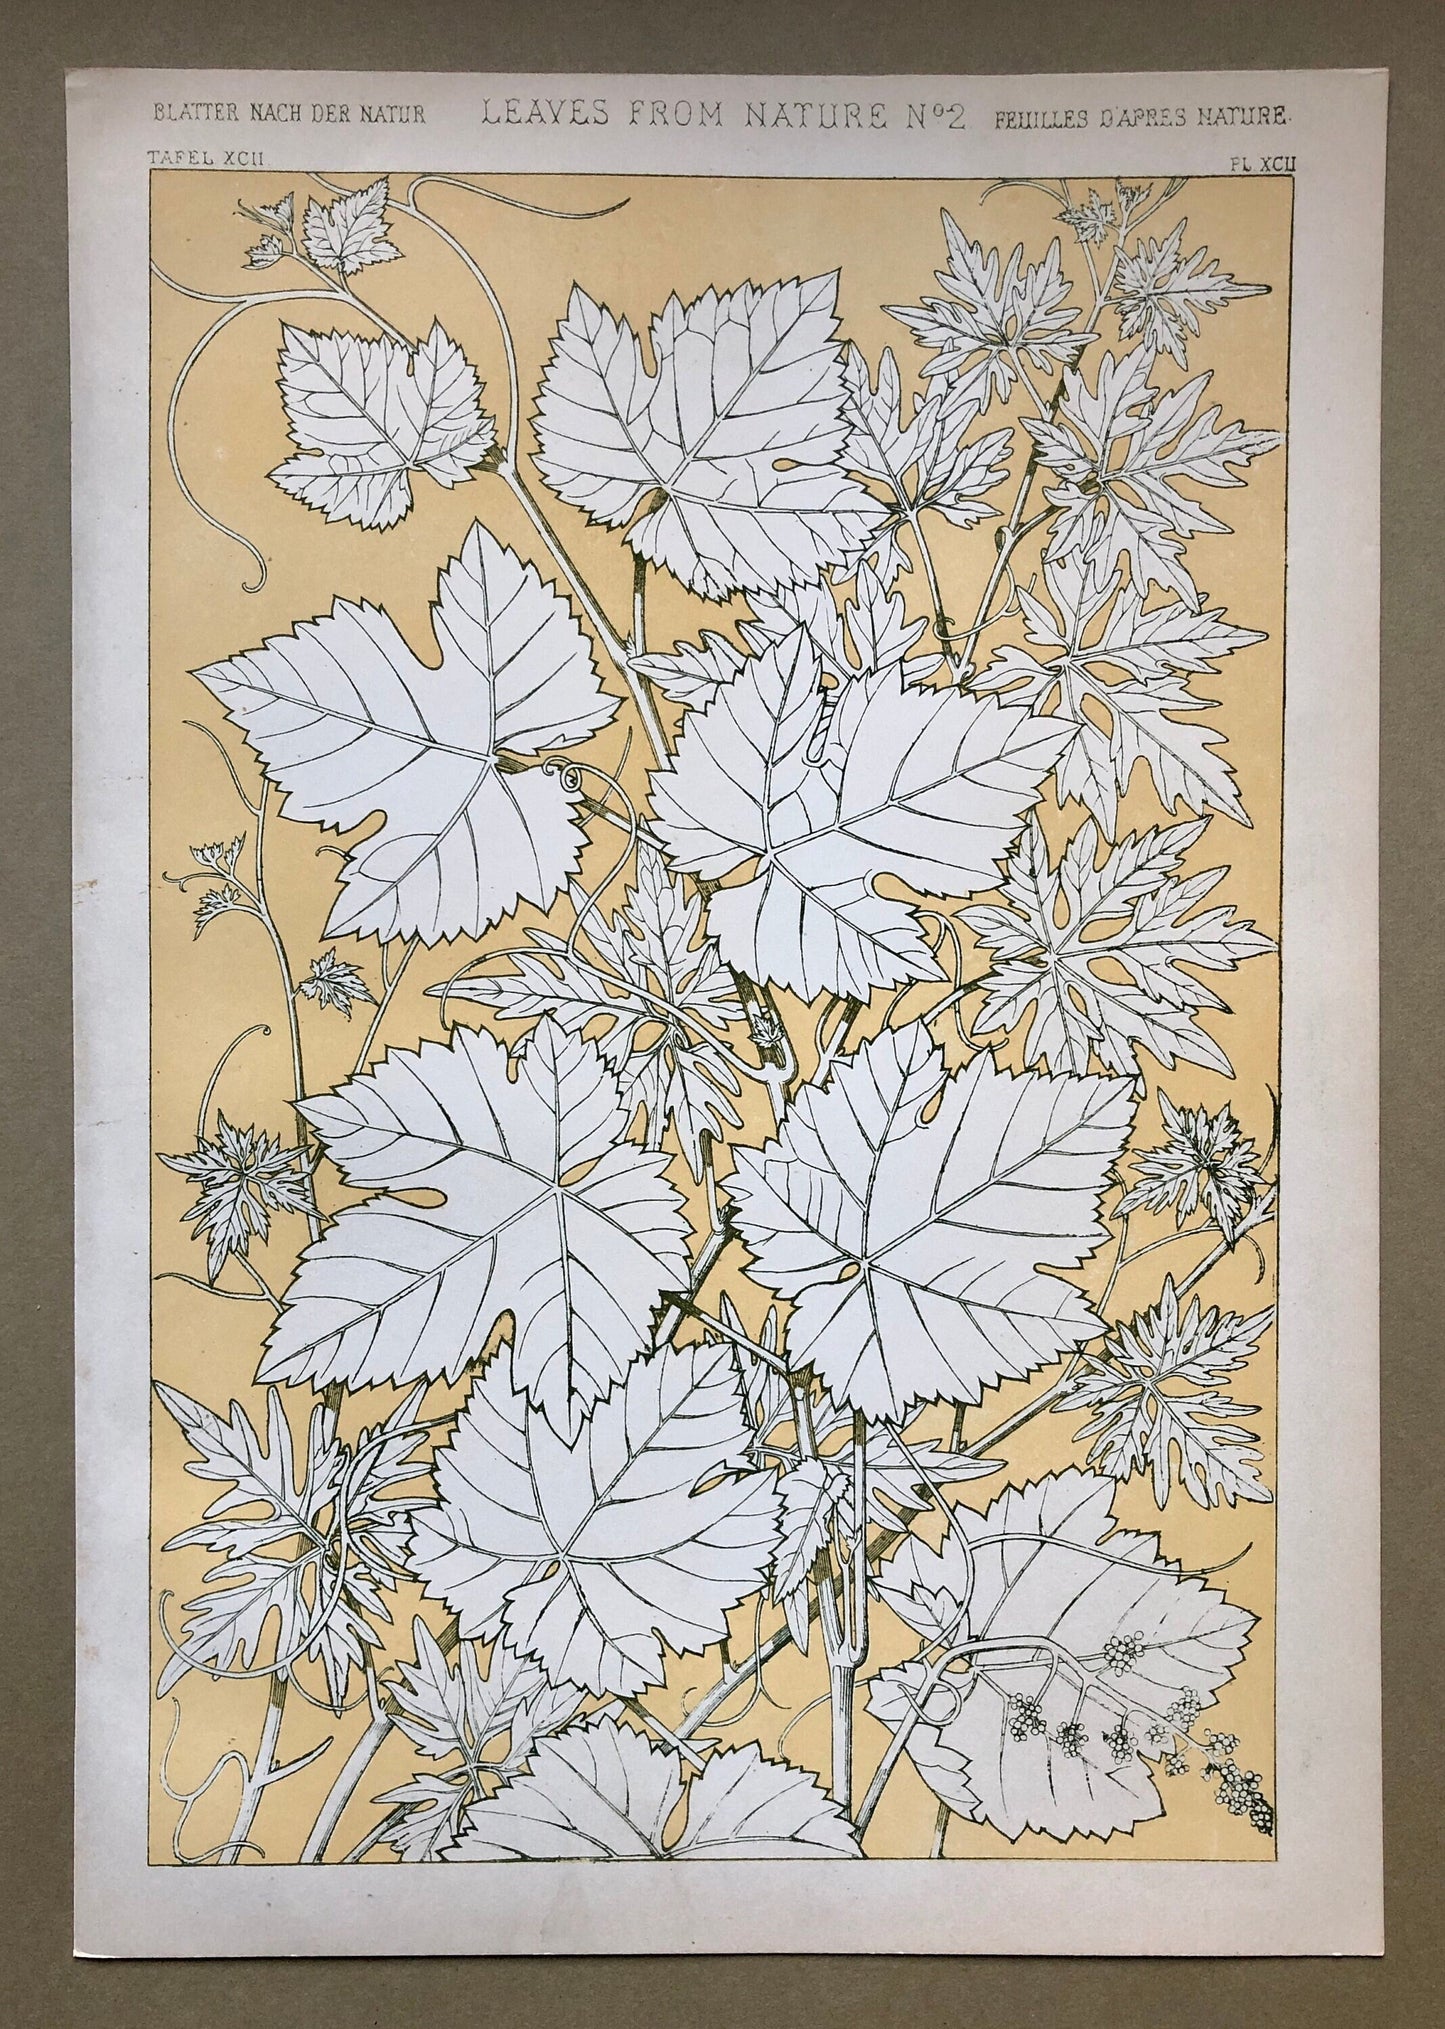 Vine Leaves. Leaves From Nature No 2. An Original Plate From The Grammar of Ornament by Owen Jones (1809 - 68). Size: 33 x 23 cms.